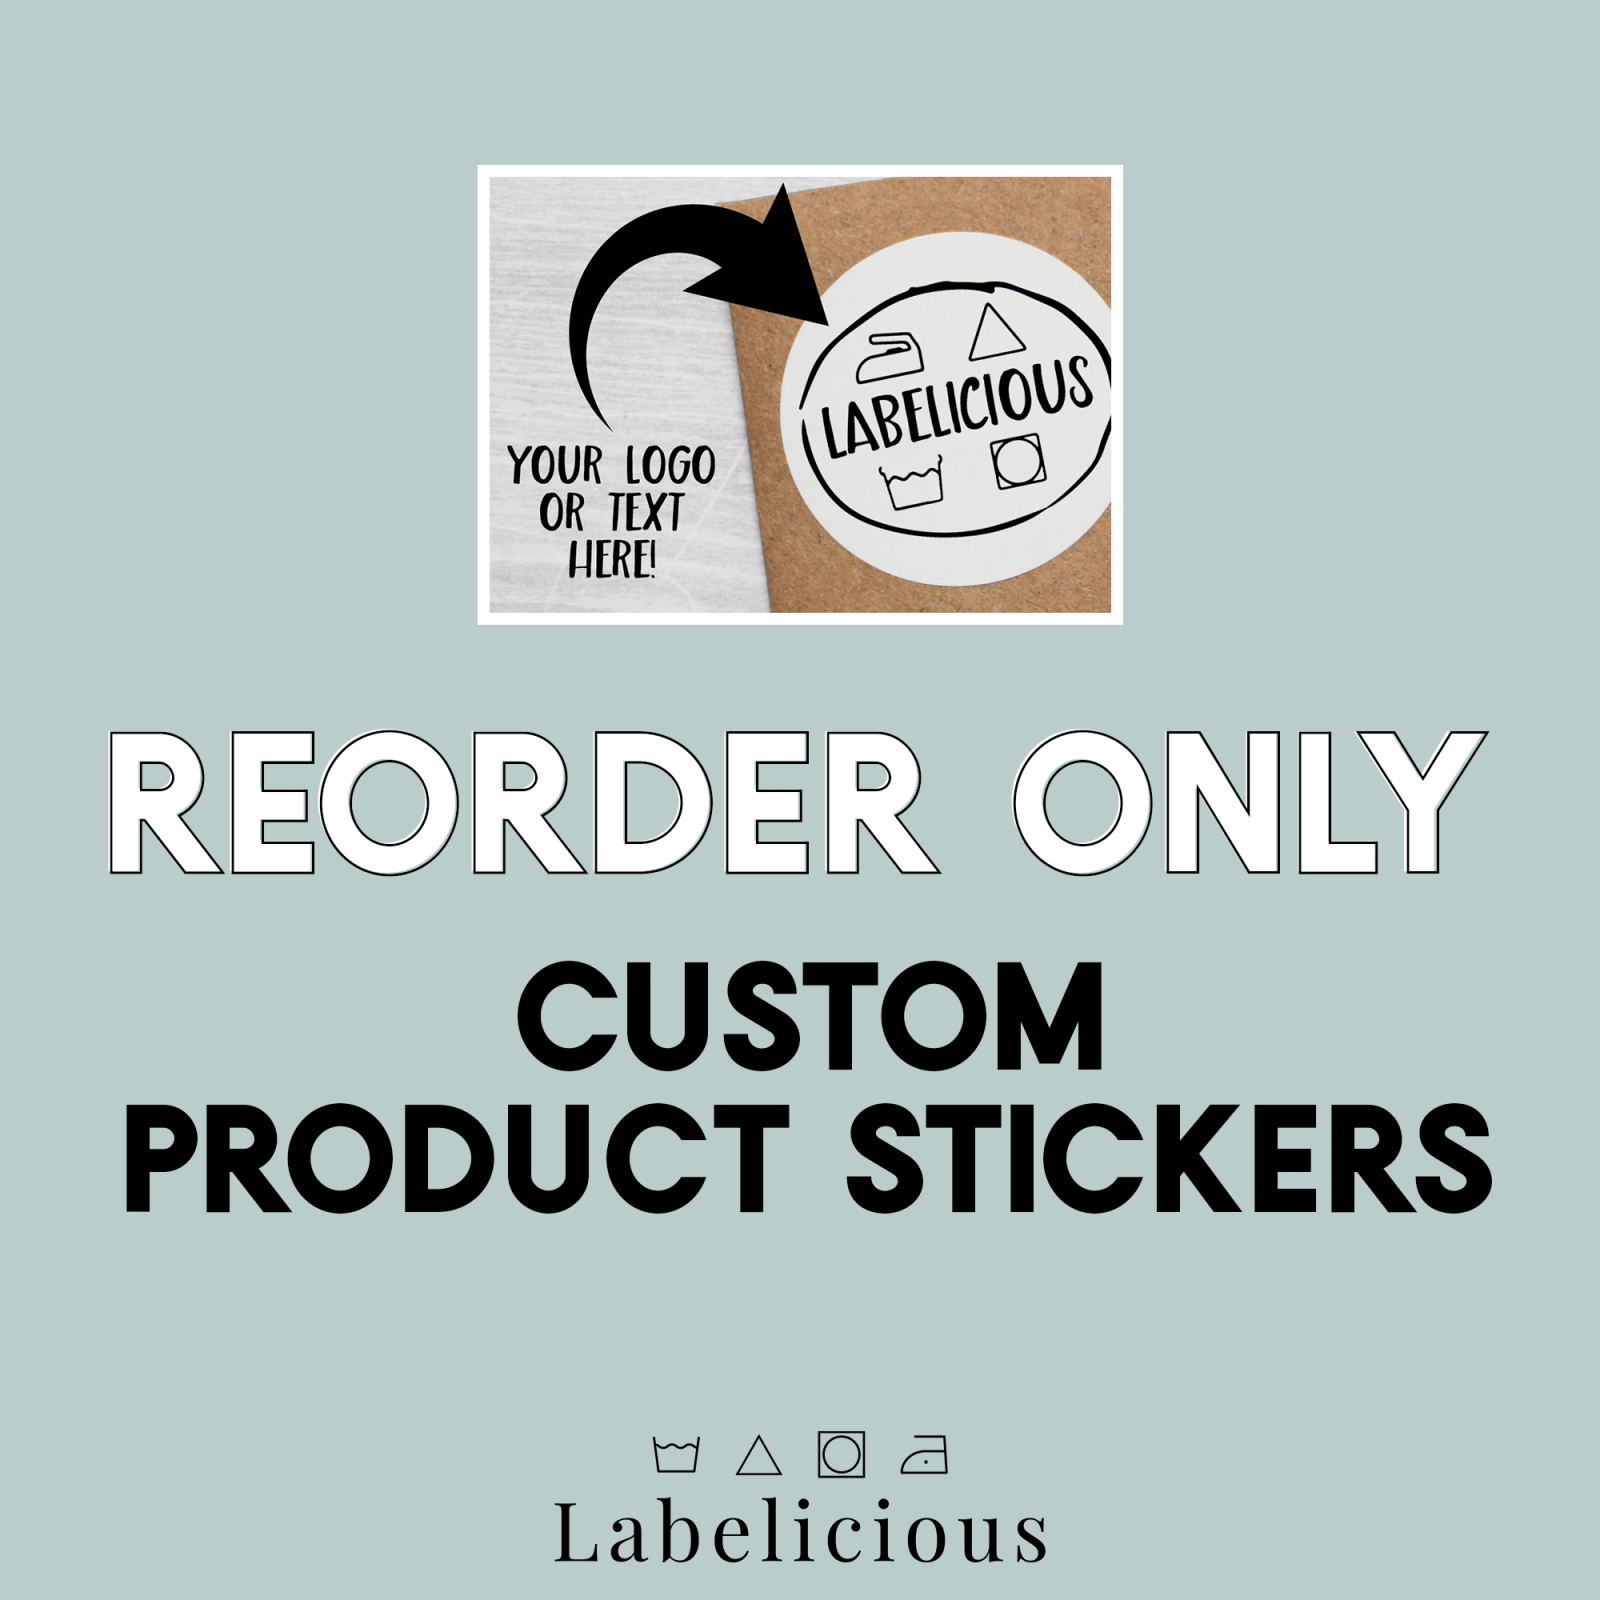 re-order-only-custom-brand-sticker-109271.png